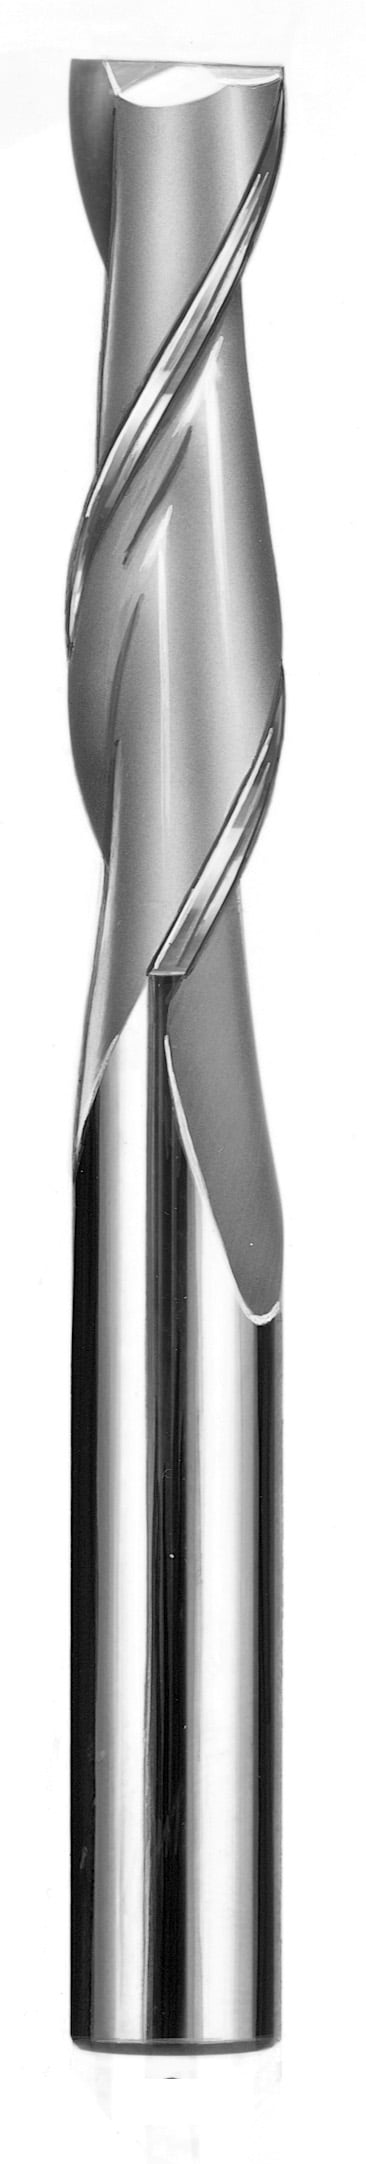 7/16" Dia, 2 Flute, Square End End Mill - 33309